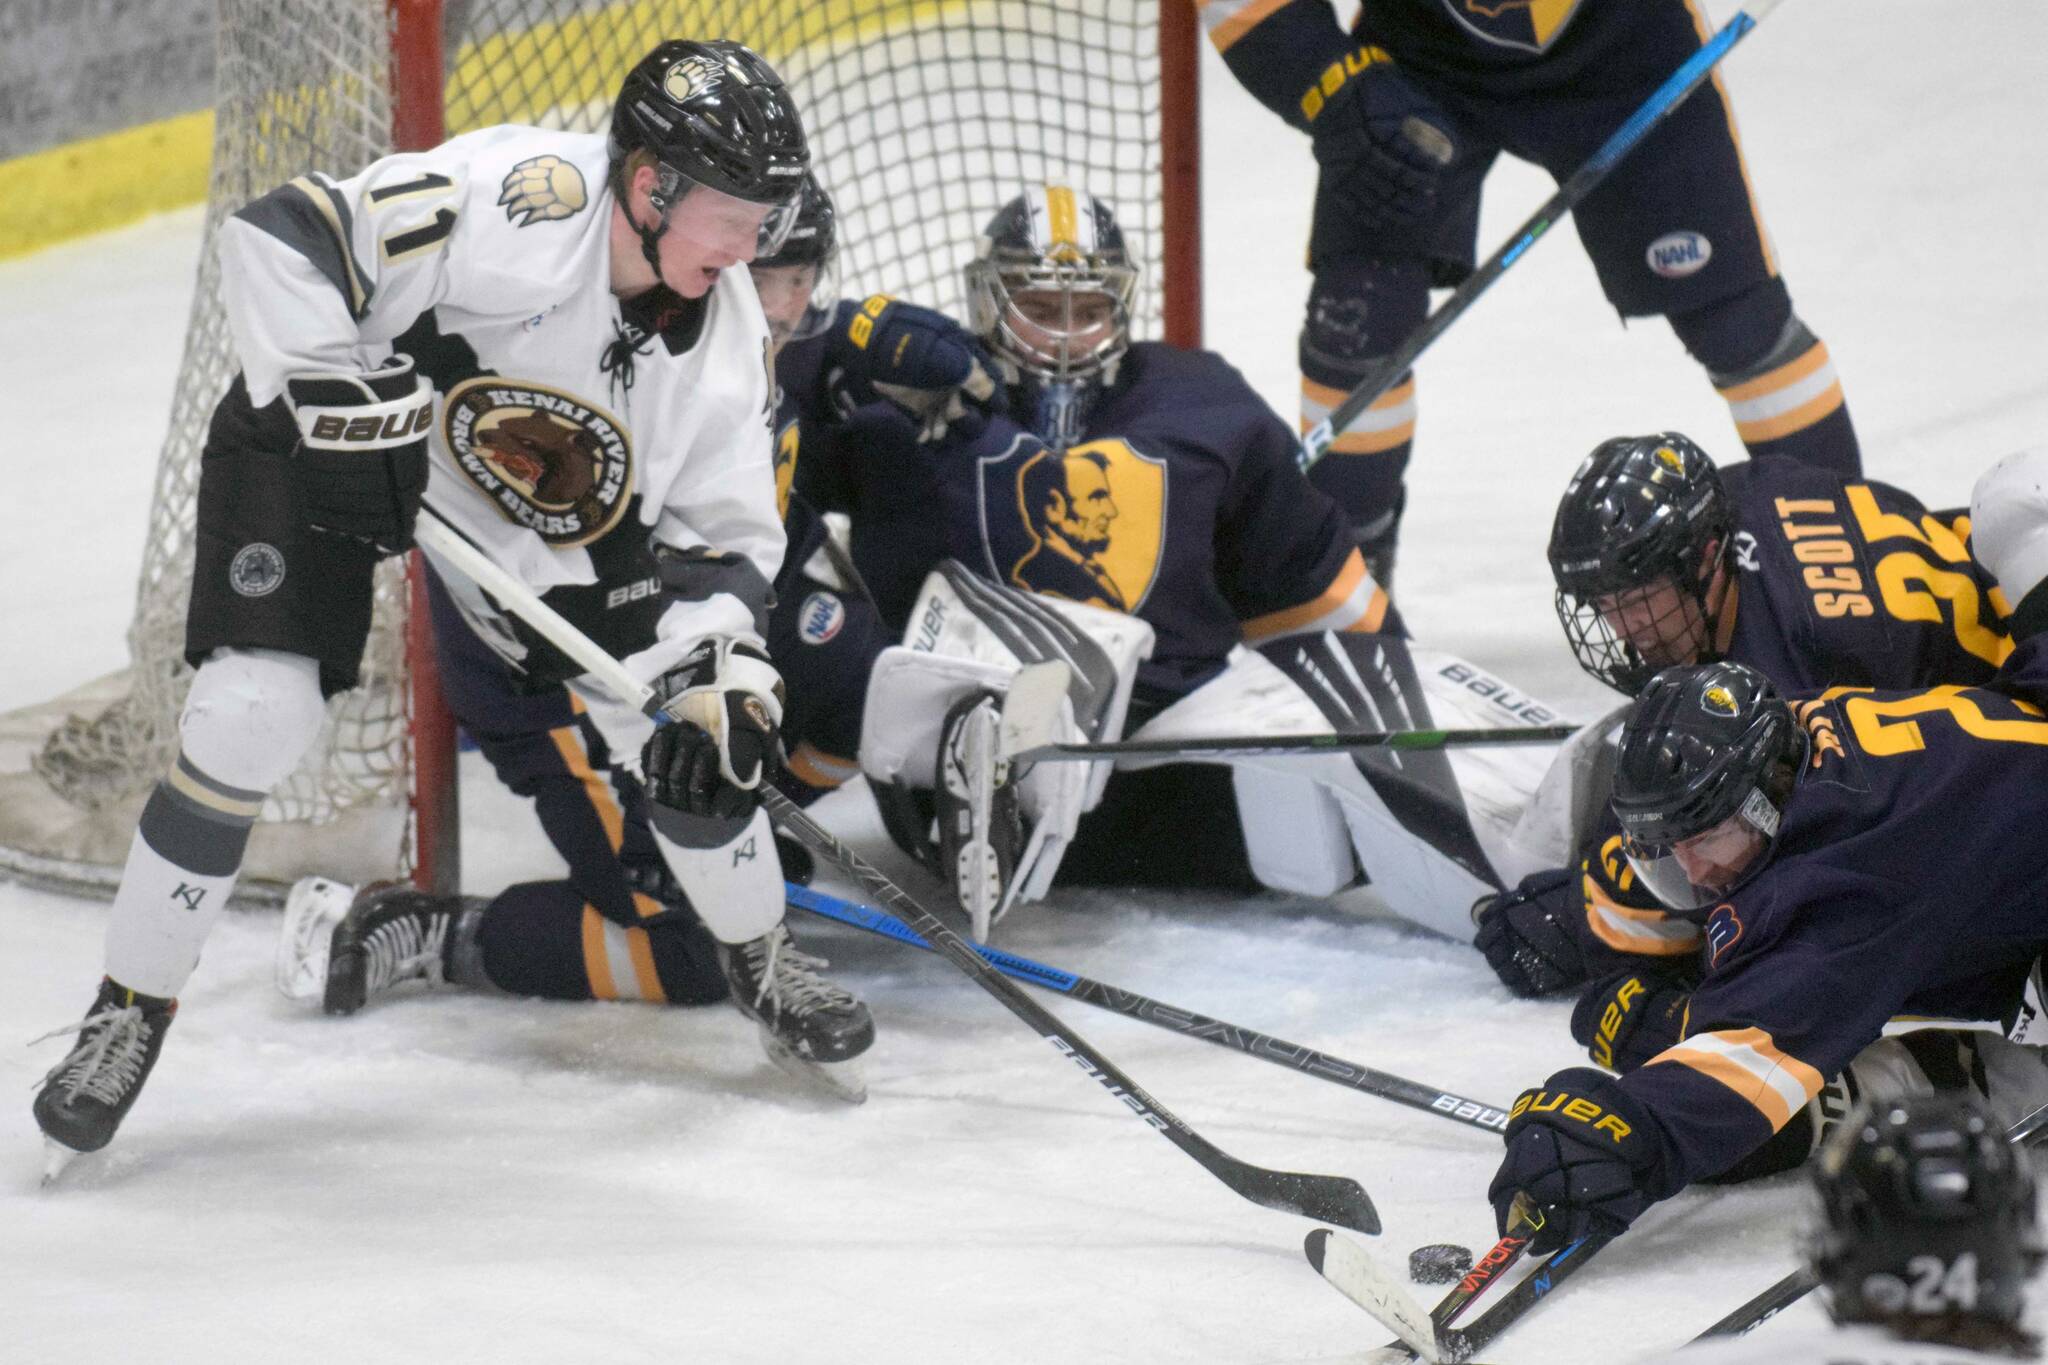 Kenai River Brown Bears forward Bryce Monrean tries to find a way through the defense of the Springfield (Illinois) Jr. Blues during a first-period power play Friday, Nov. 19, 2021, at the Soldotna Regional Sports Complex. (Photo by Jeff Helminiak/Peninsula Clarion)